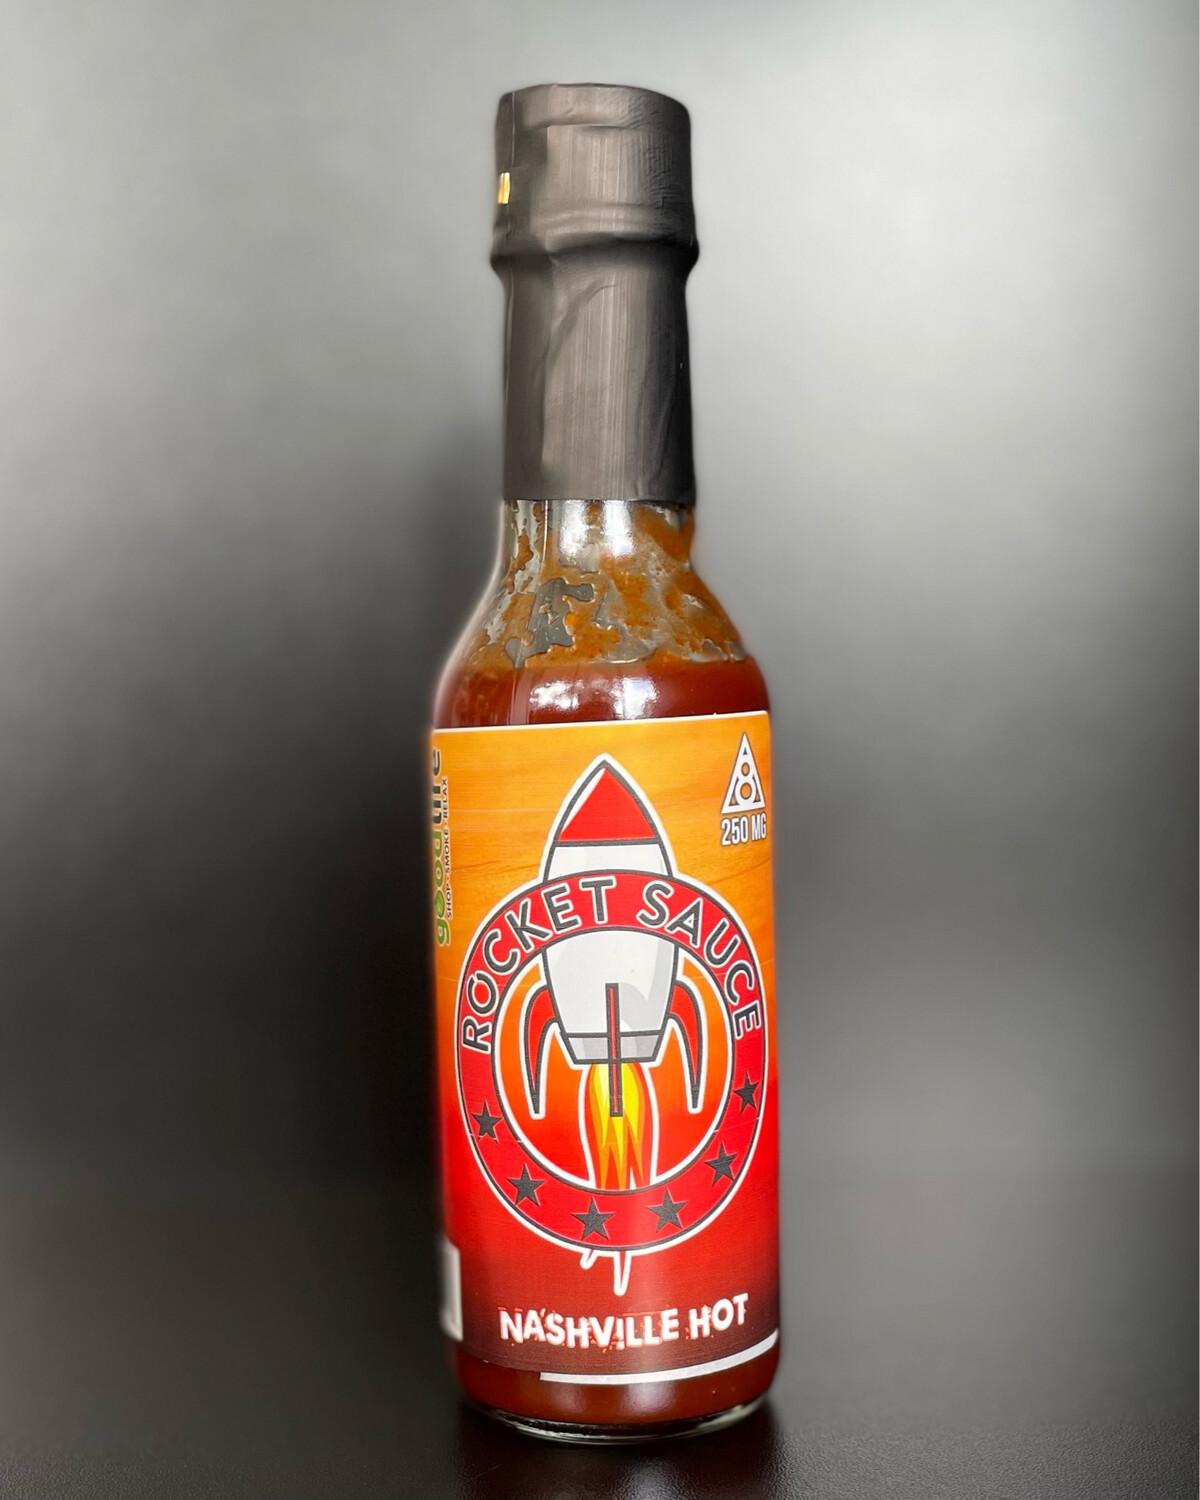 D8THC Infused Nashville HOT Sauce! (250mgTHC) (New Product)